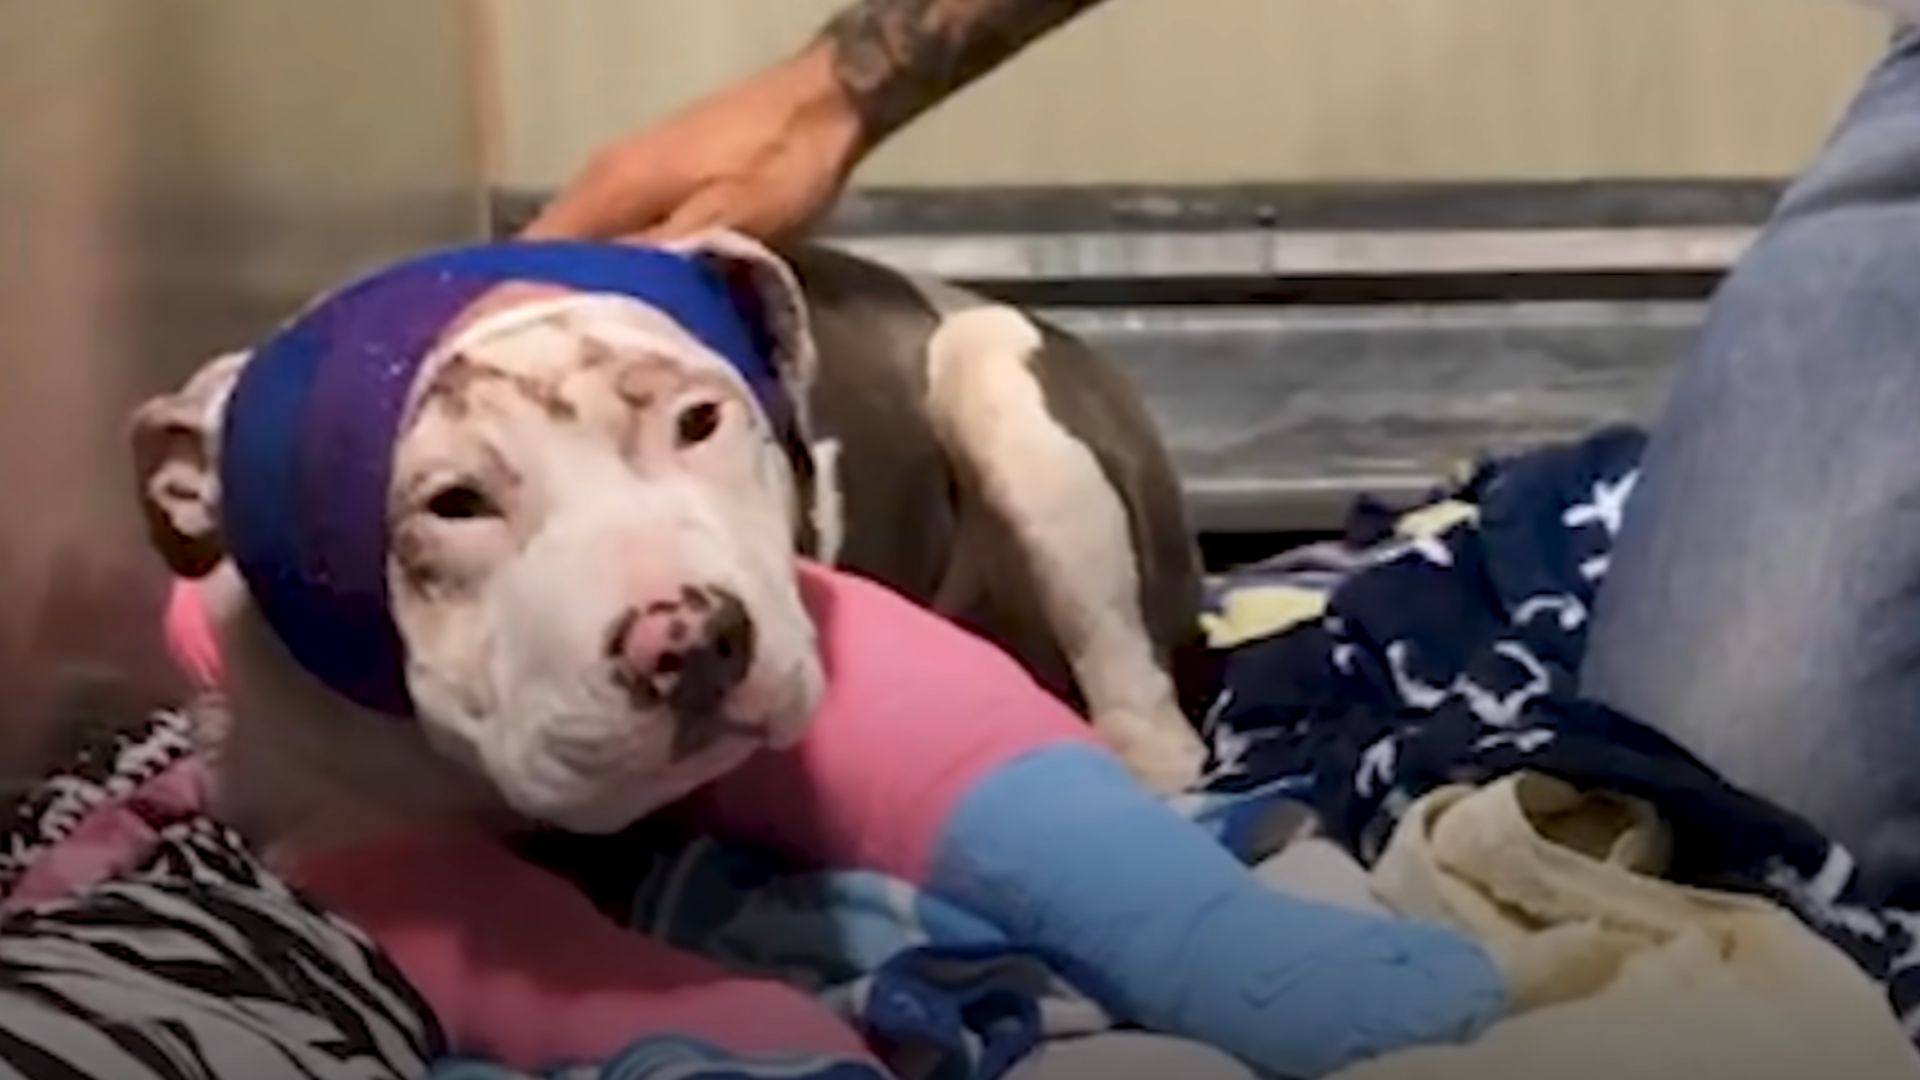 Badly Injured Pittie Wrapped In Bandages Blossoms In Her Adorable Butterfly Costume